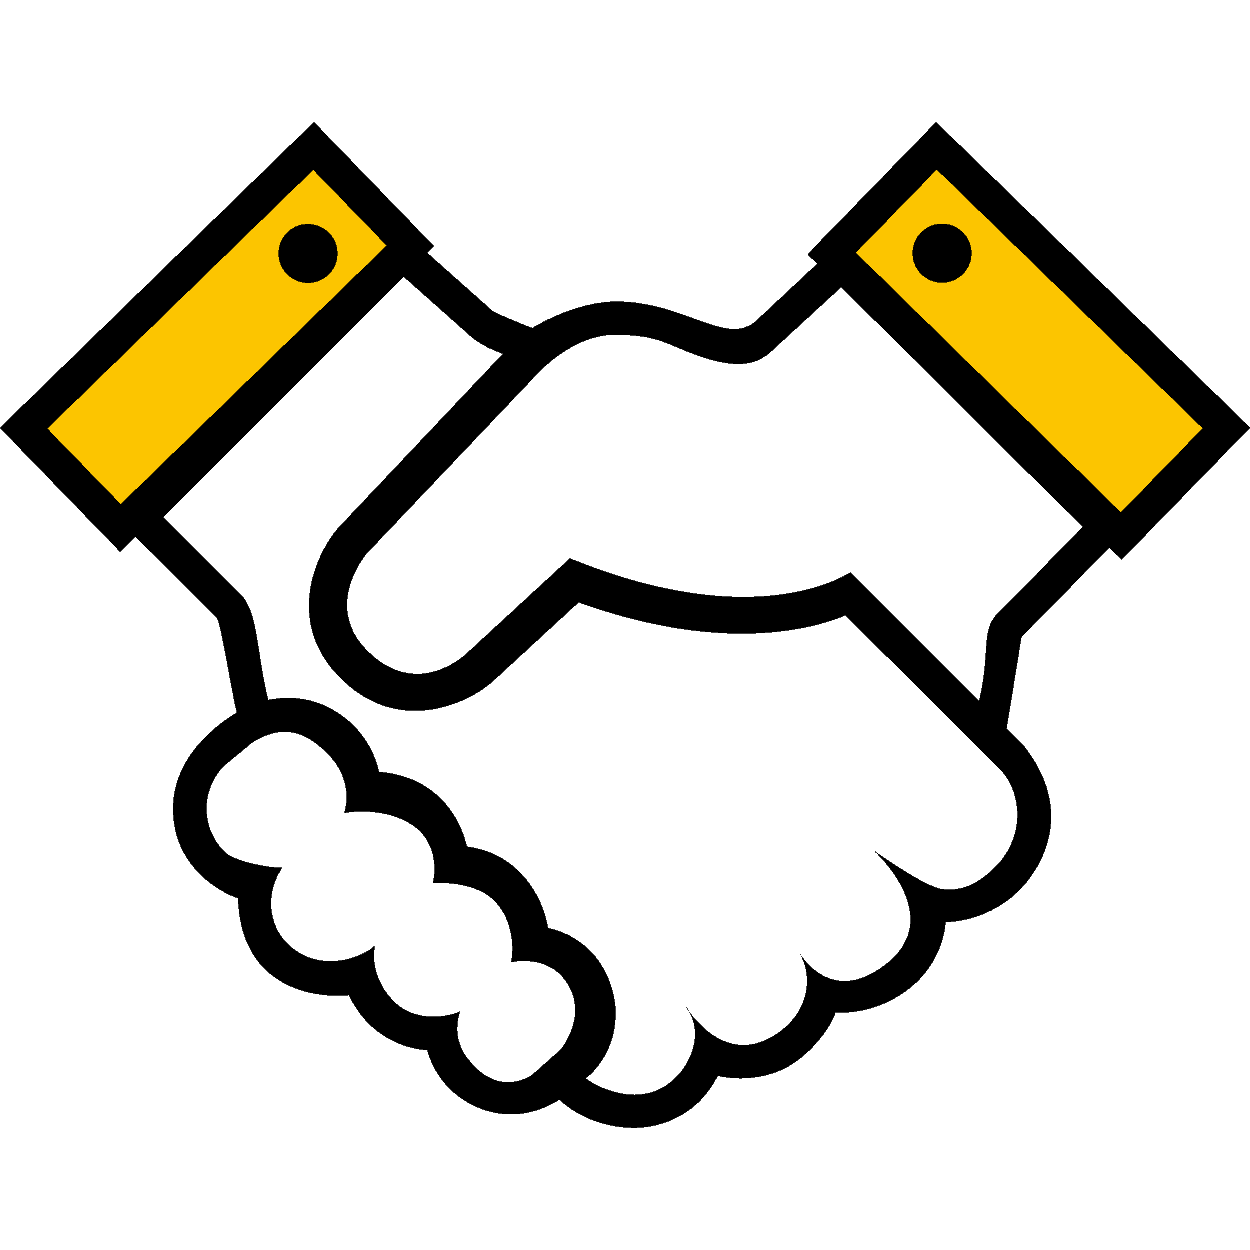 A graphic of a handshake with yellow highlights.